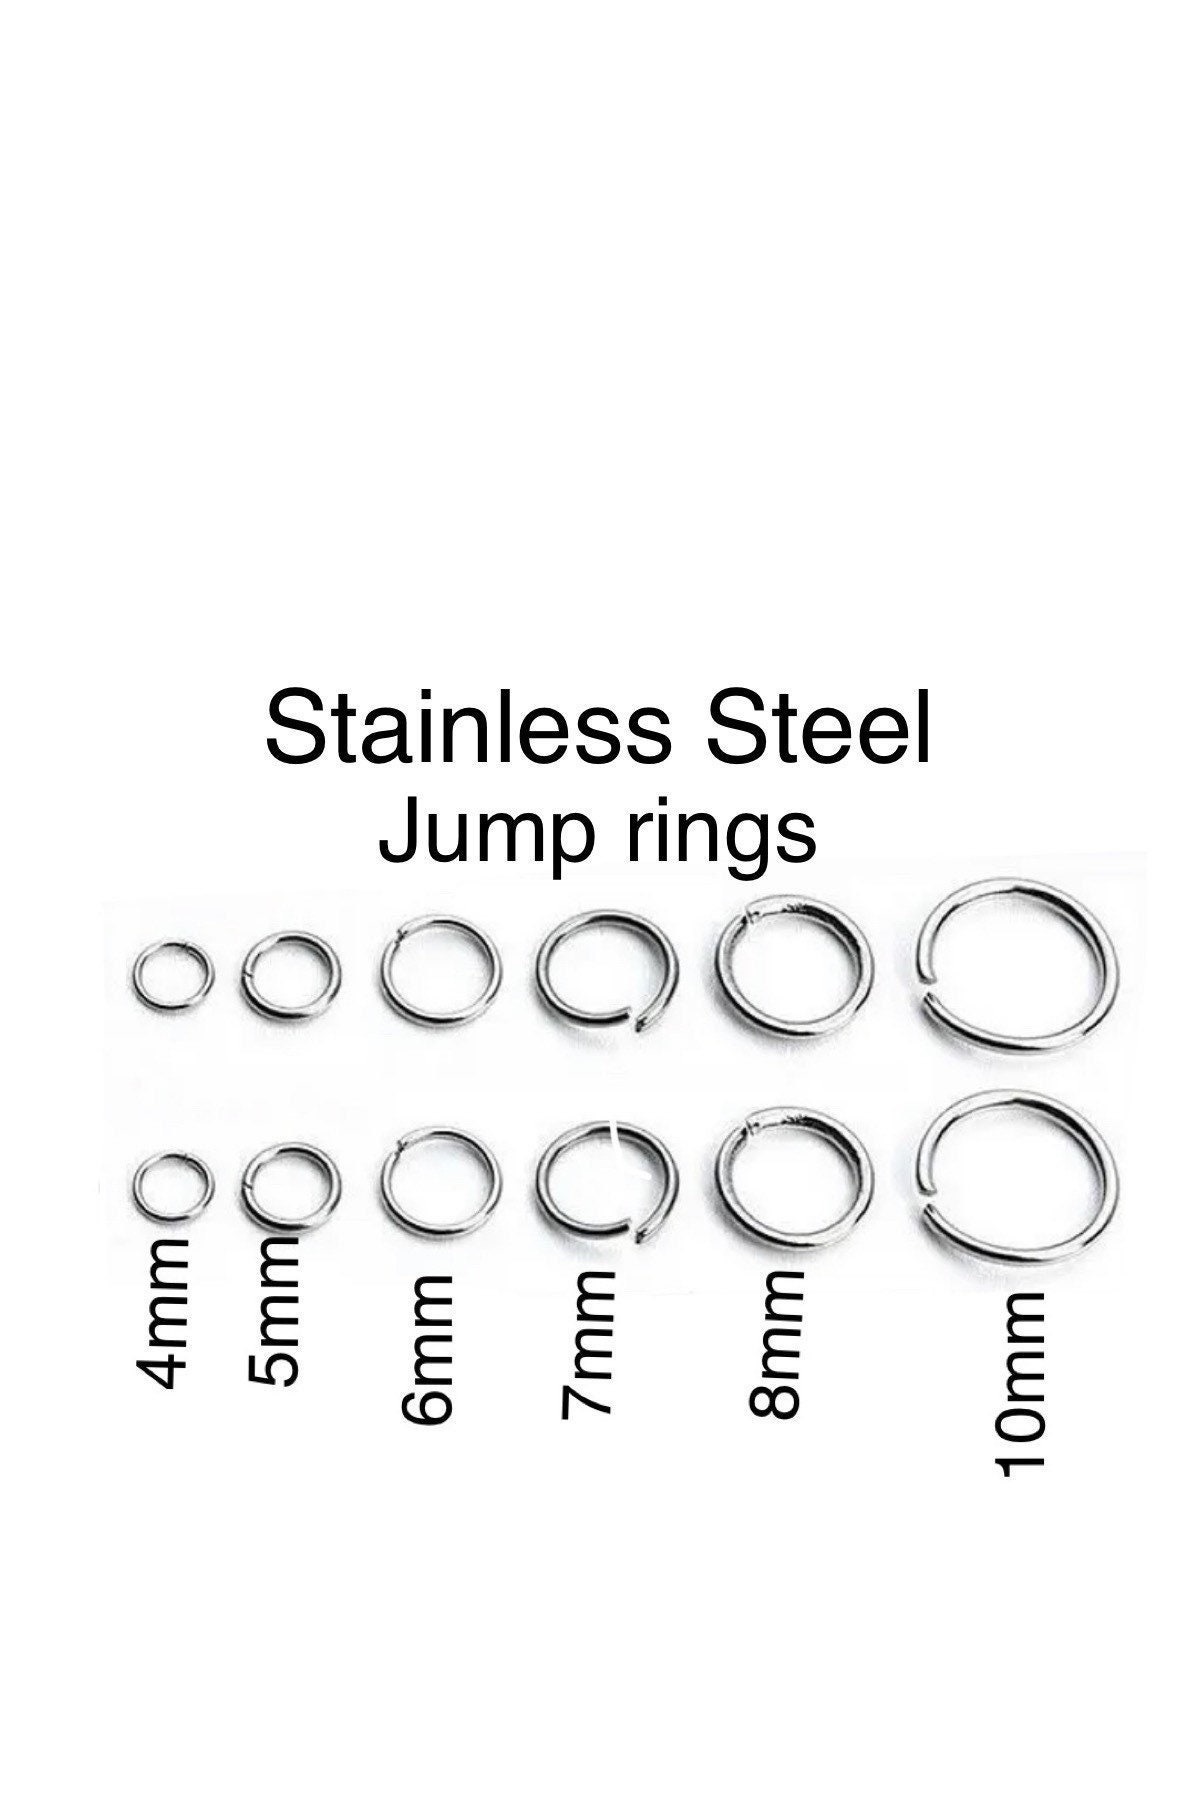 Jump Rings, Gold Stainless, 100 Pieces, WARNING Read Description, Jewelry  Making Supplies, Gold Findings, Choose Your Size 